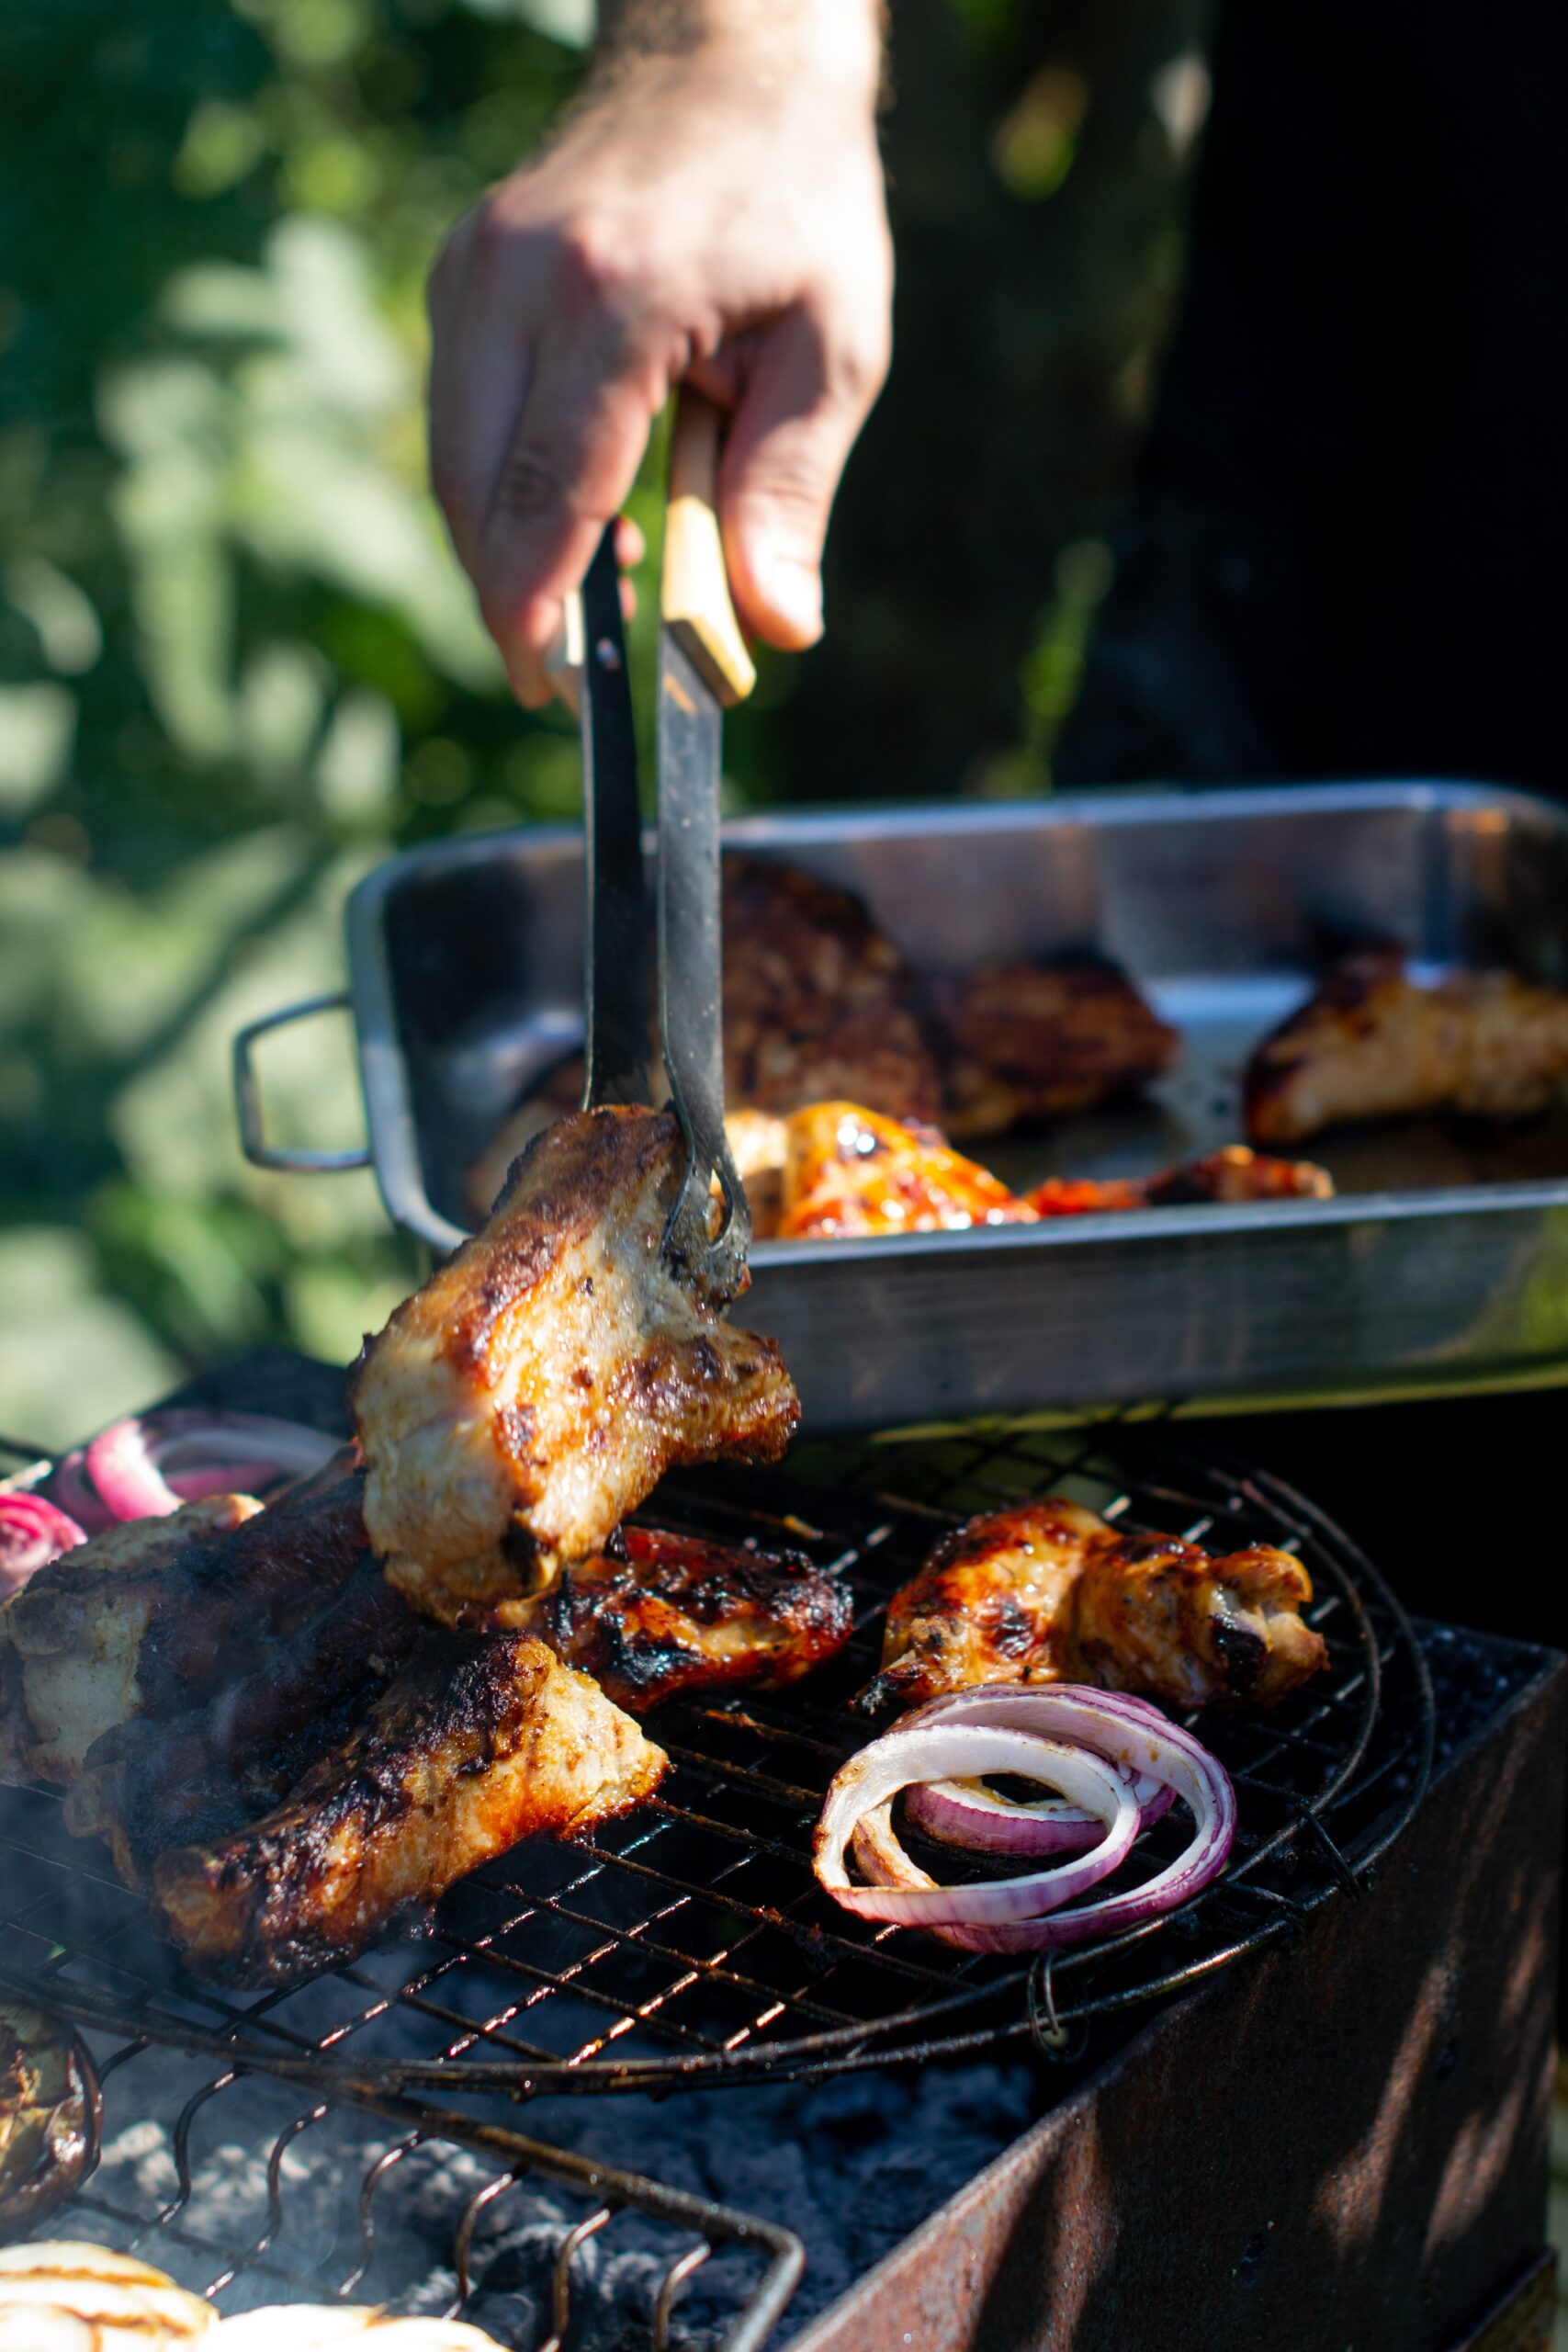 What Is The Secret To A Good Southern-style Barbecue?